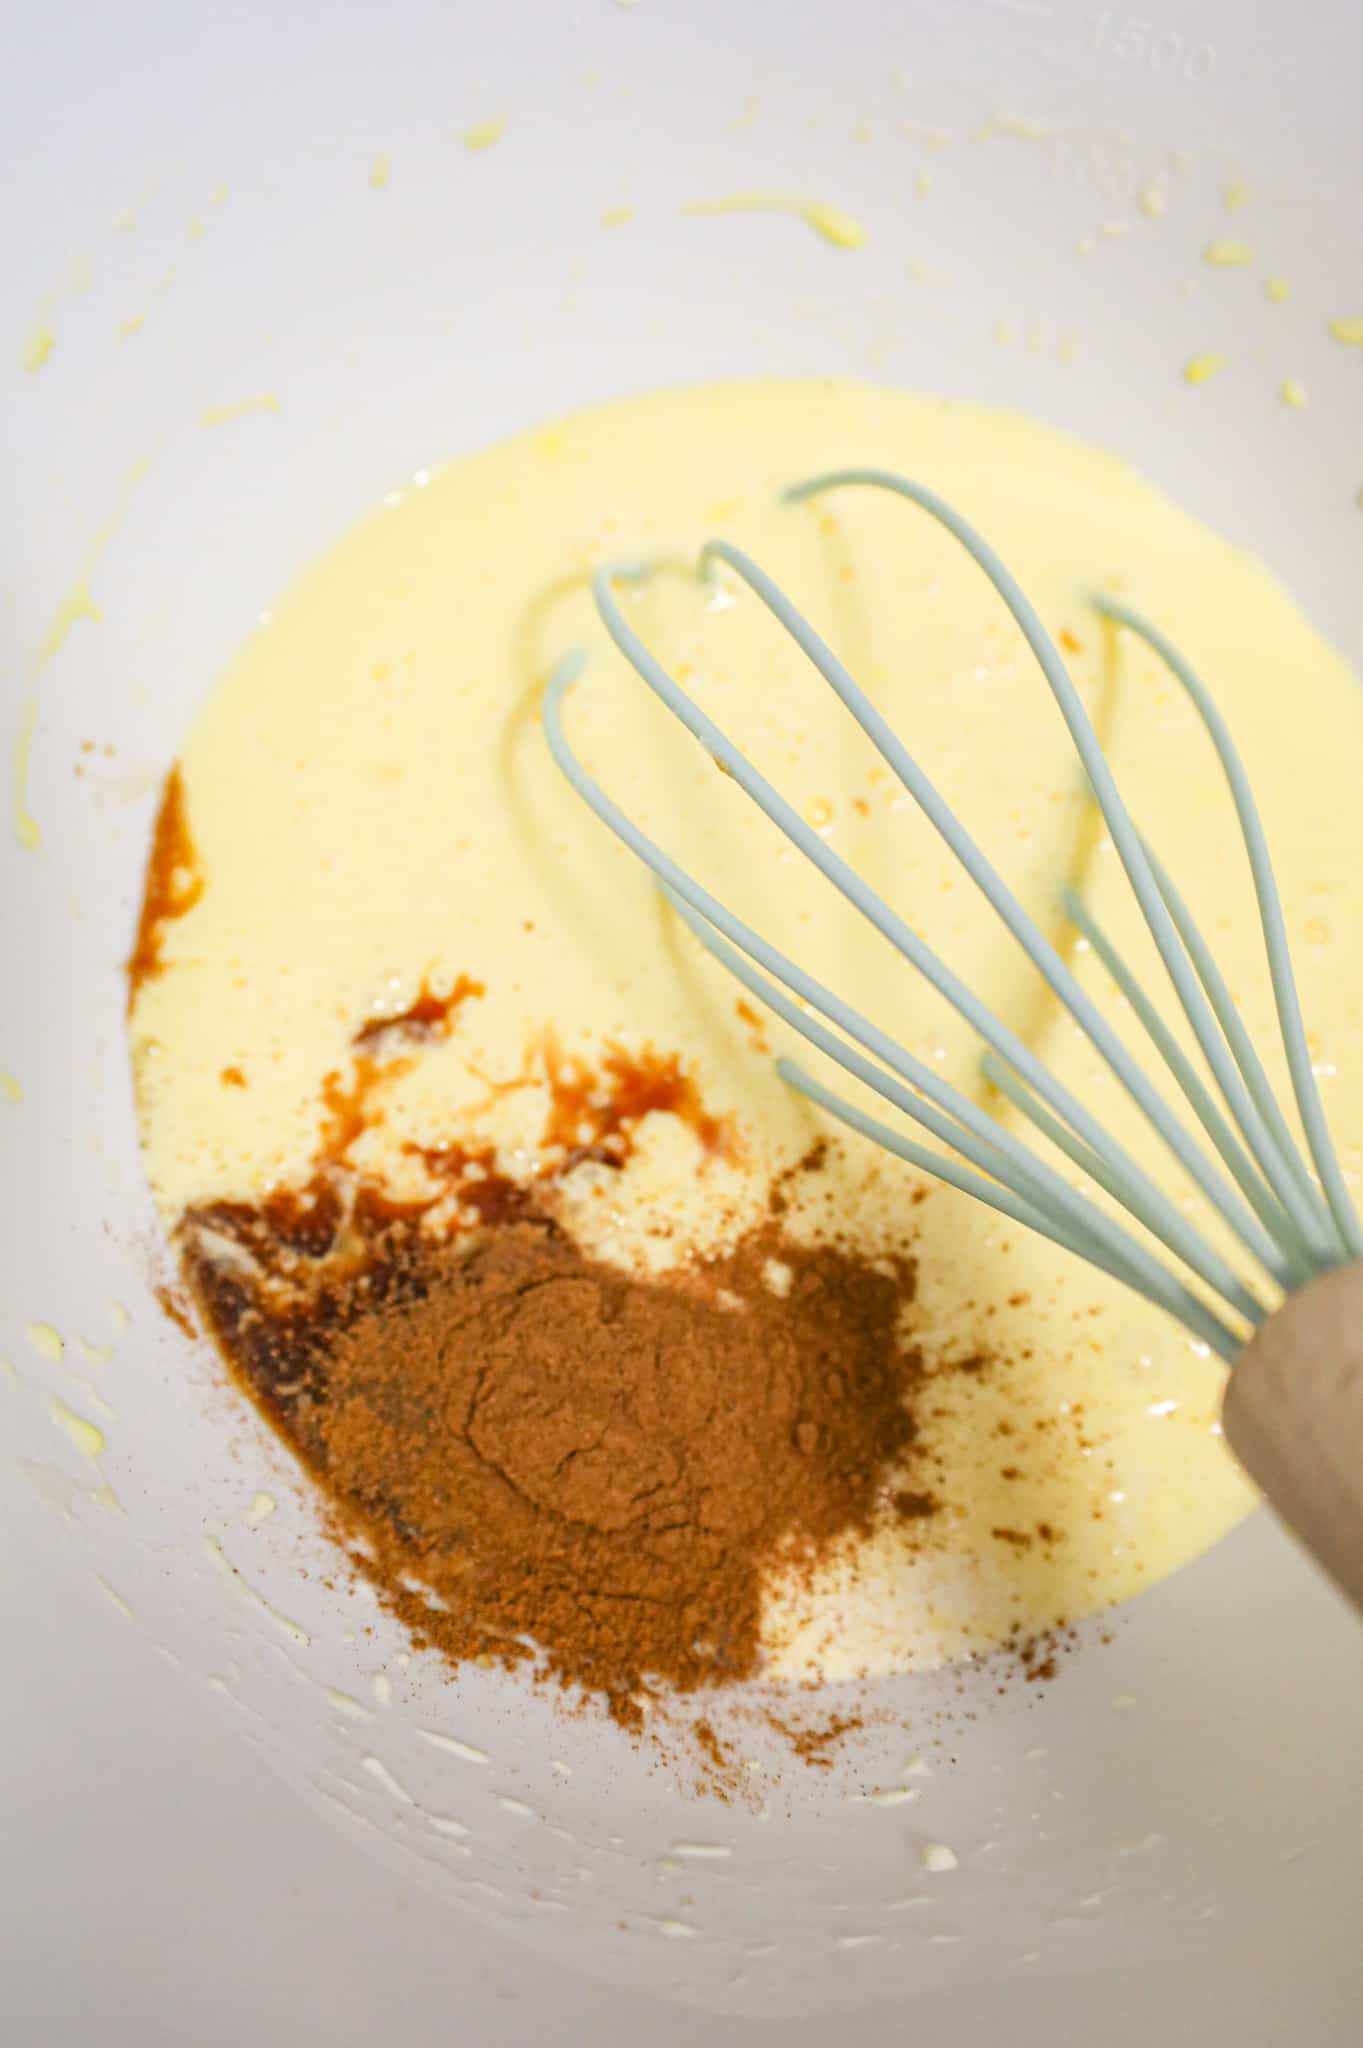 cinnamon and vanilla extract added to cream and egg mixture in a mixing bowl